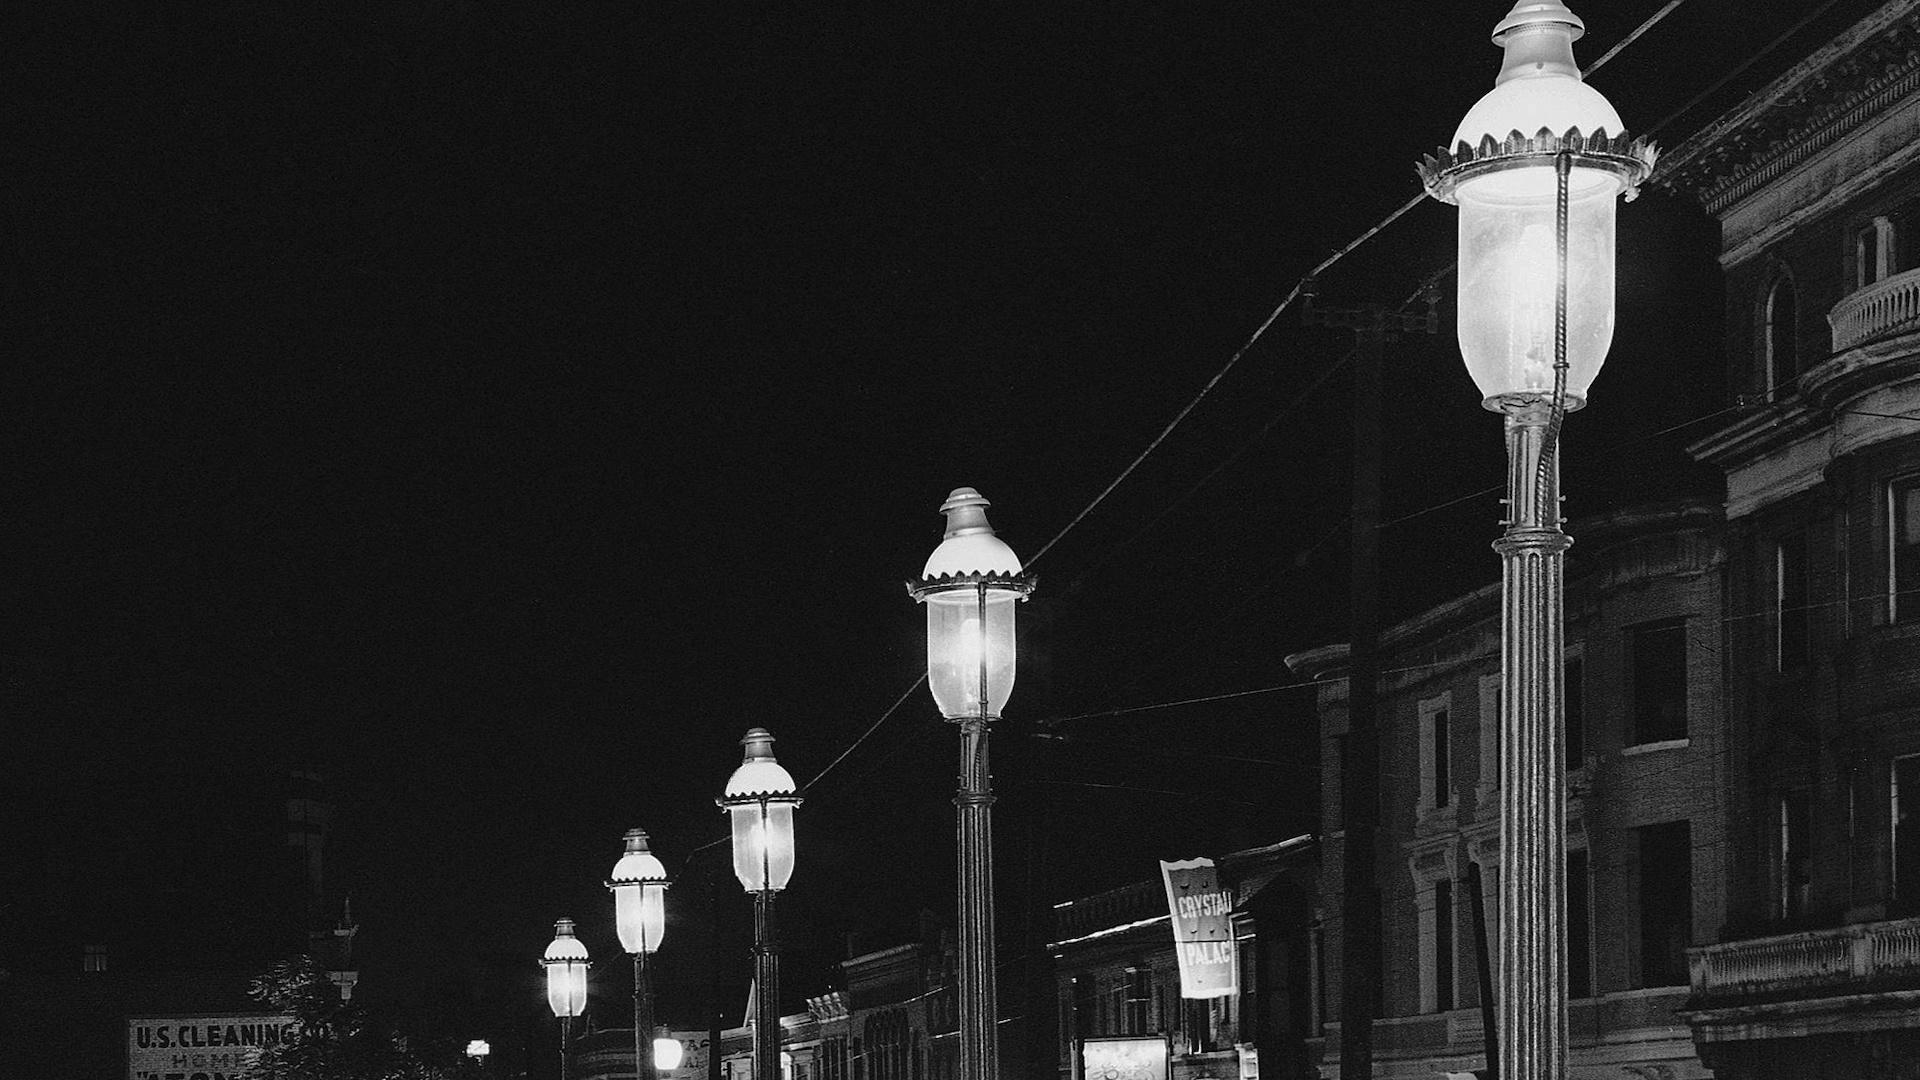 Gas lamps illuminate St. Louis' Gaslight Square on April 2, 1962. "Gaslighting" — mind manipulating, grossly misleading, downright deceitful — is Merriam-Webster's word of 2022. (AP Photo/JMH, File)